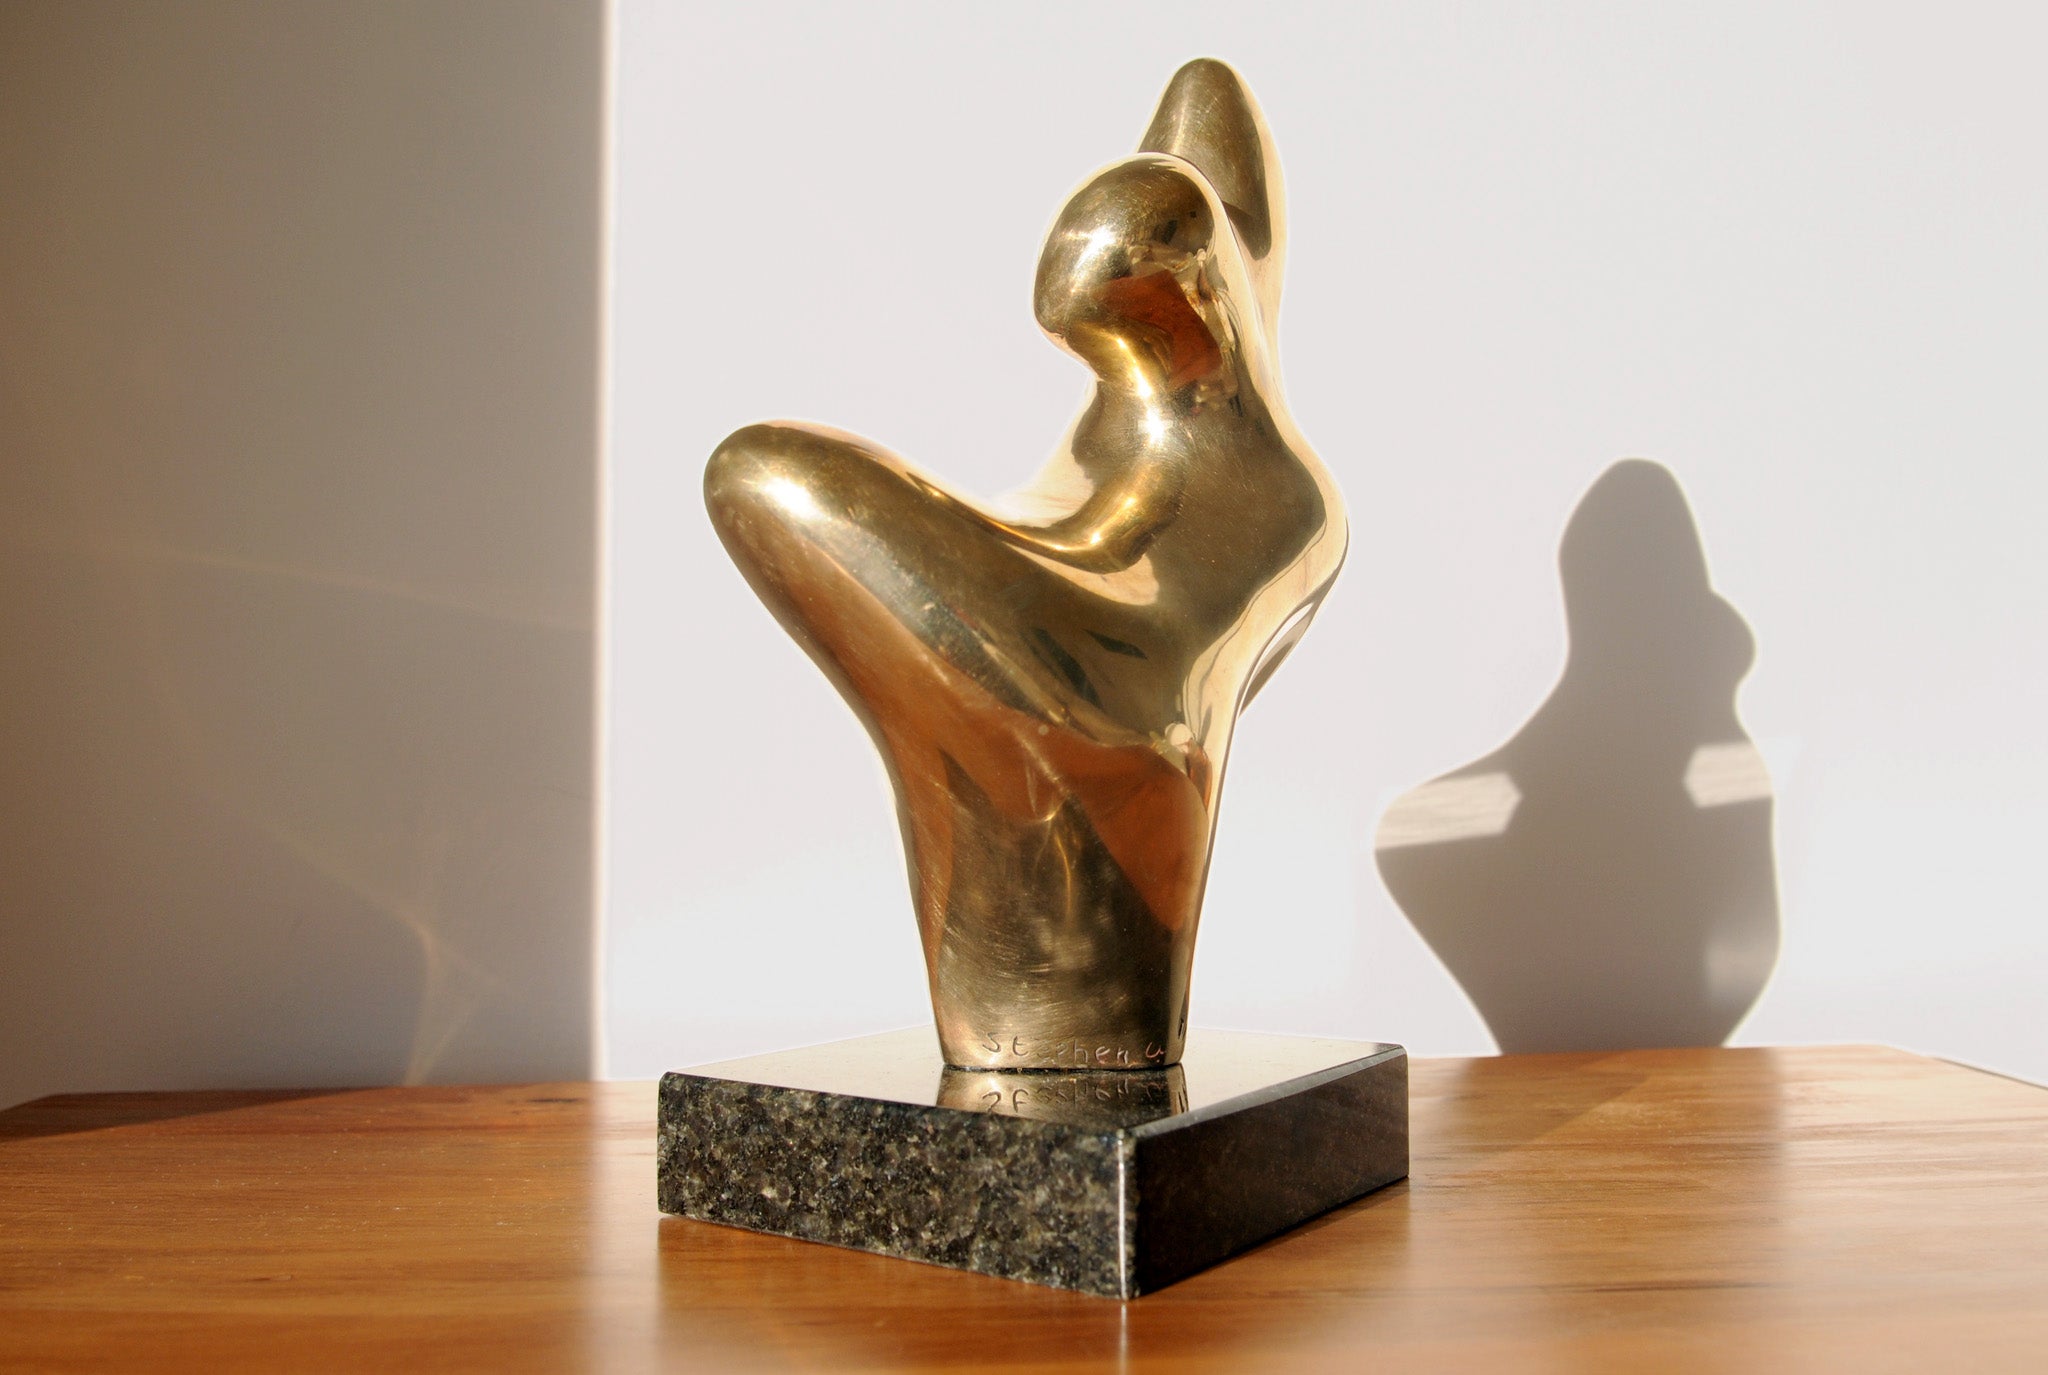 Abstract bronze sculpture of female figure for sale by Stephen Williams | New Zealand.